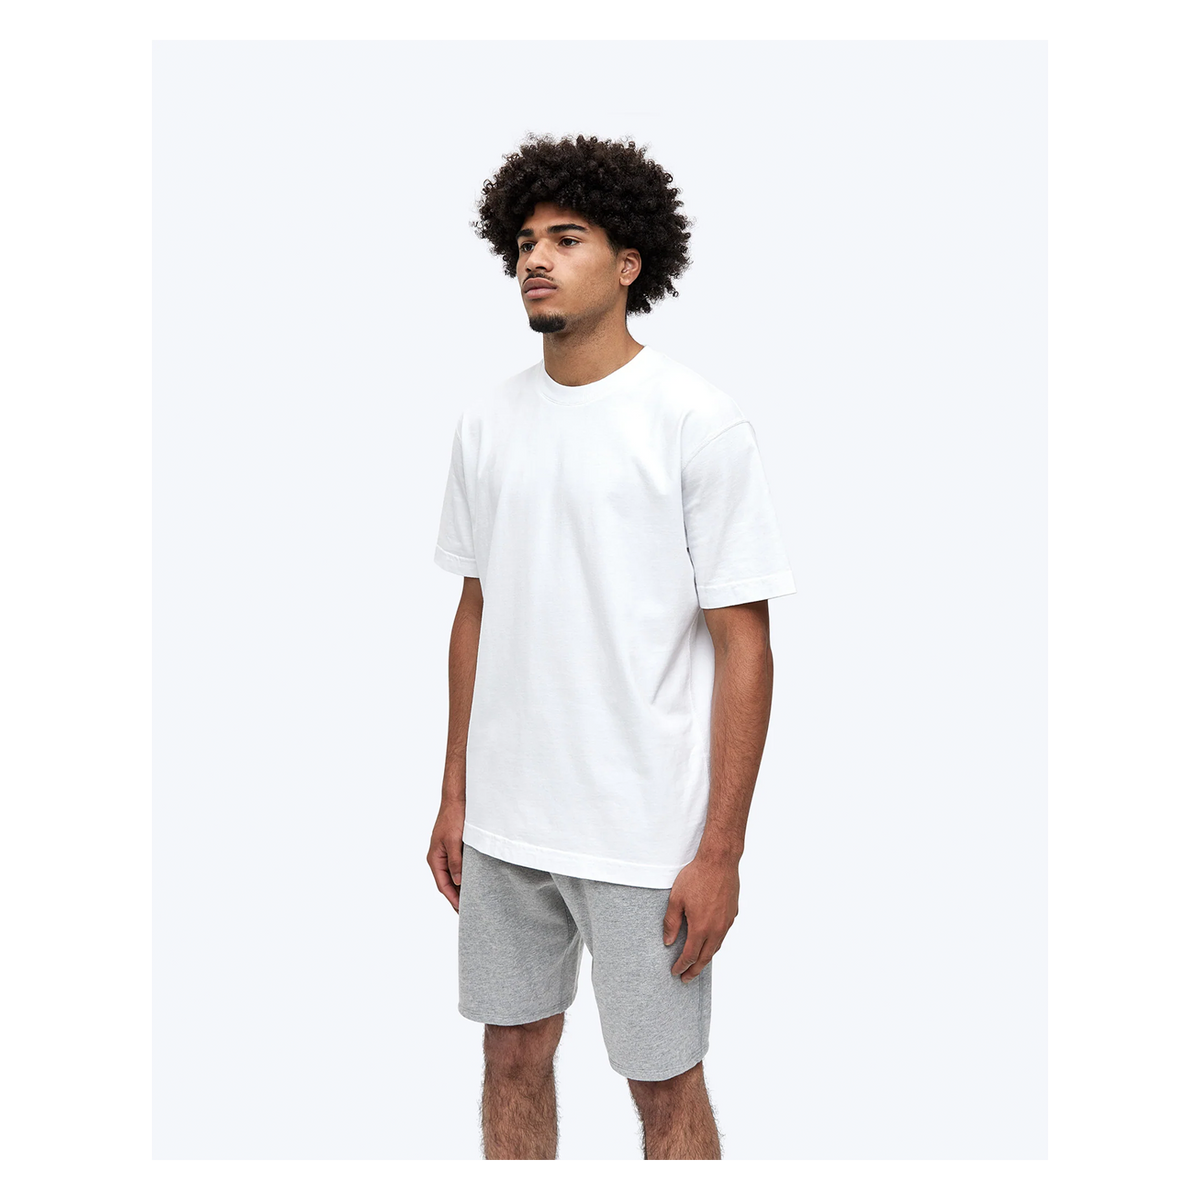 Mid-Weight Jersey T-Shirt - White